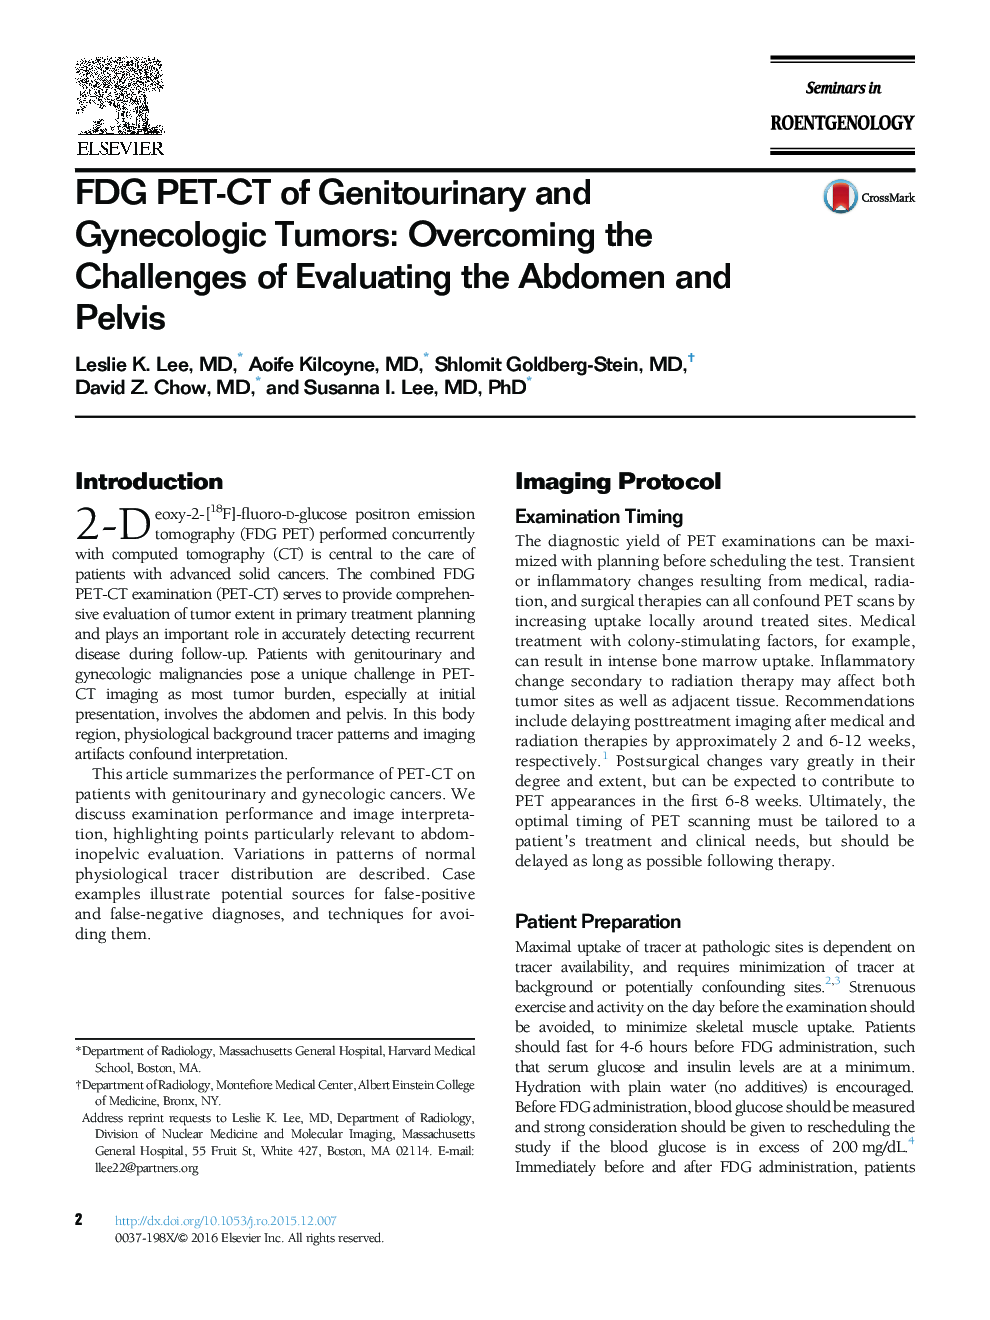 FDG PET-CT of Genitourinary and Gynecologic Tumors: Overcoming the Challenges of Evaluating the Abdomen and Pelvis